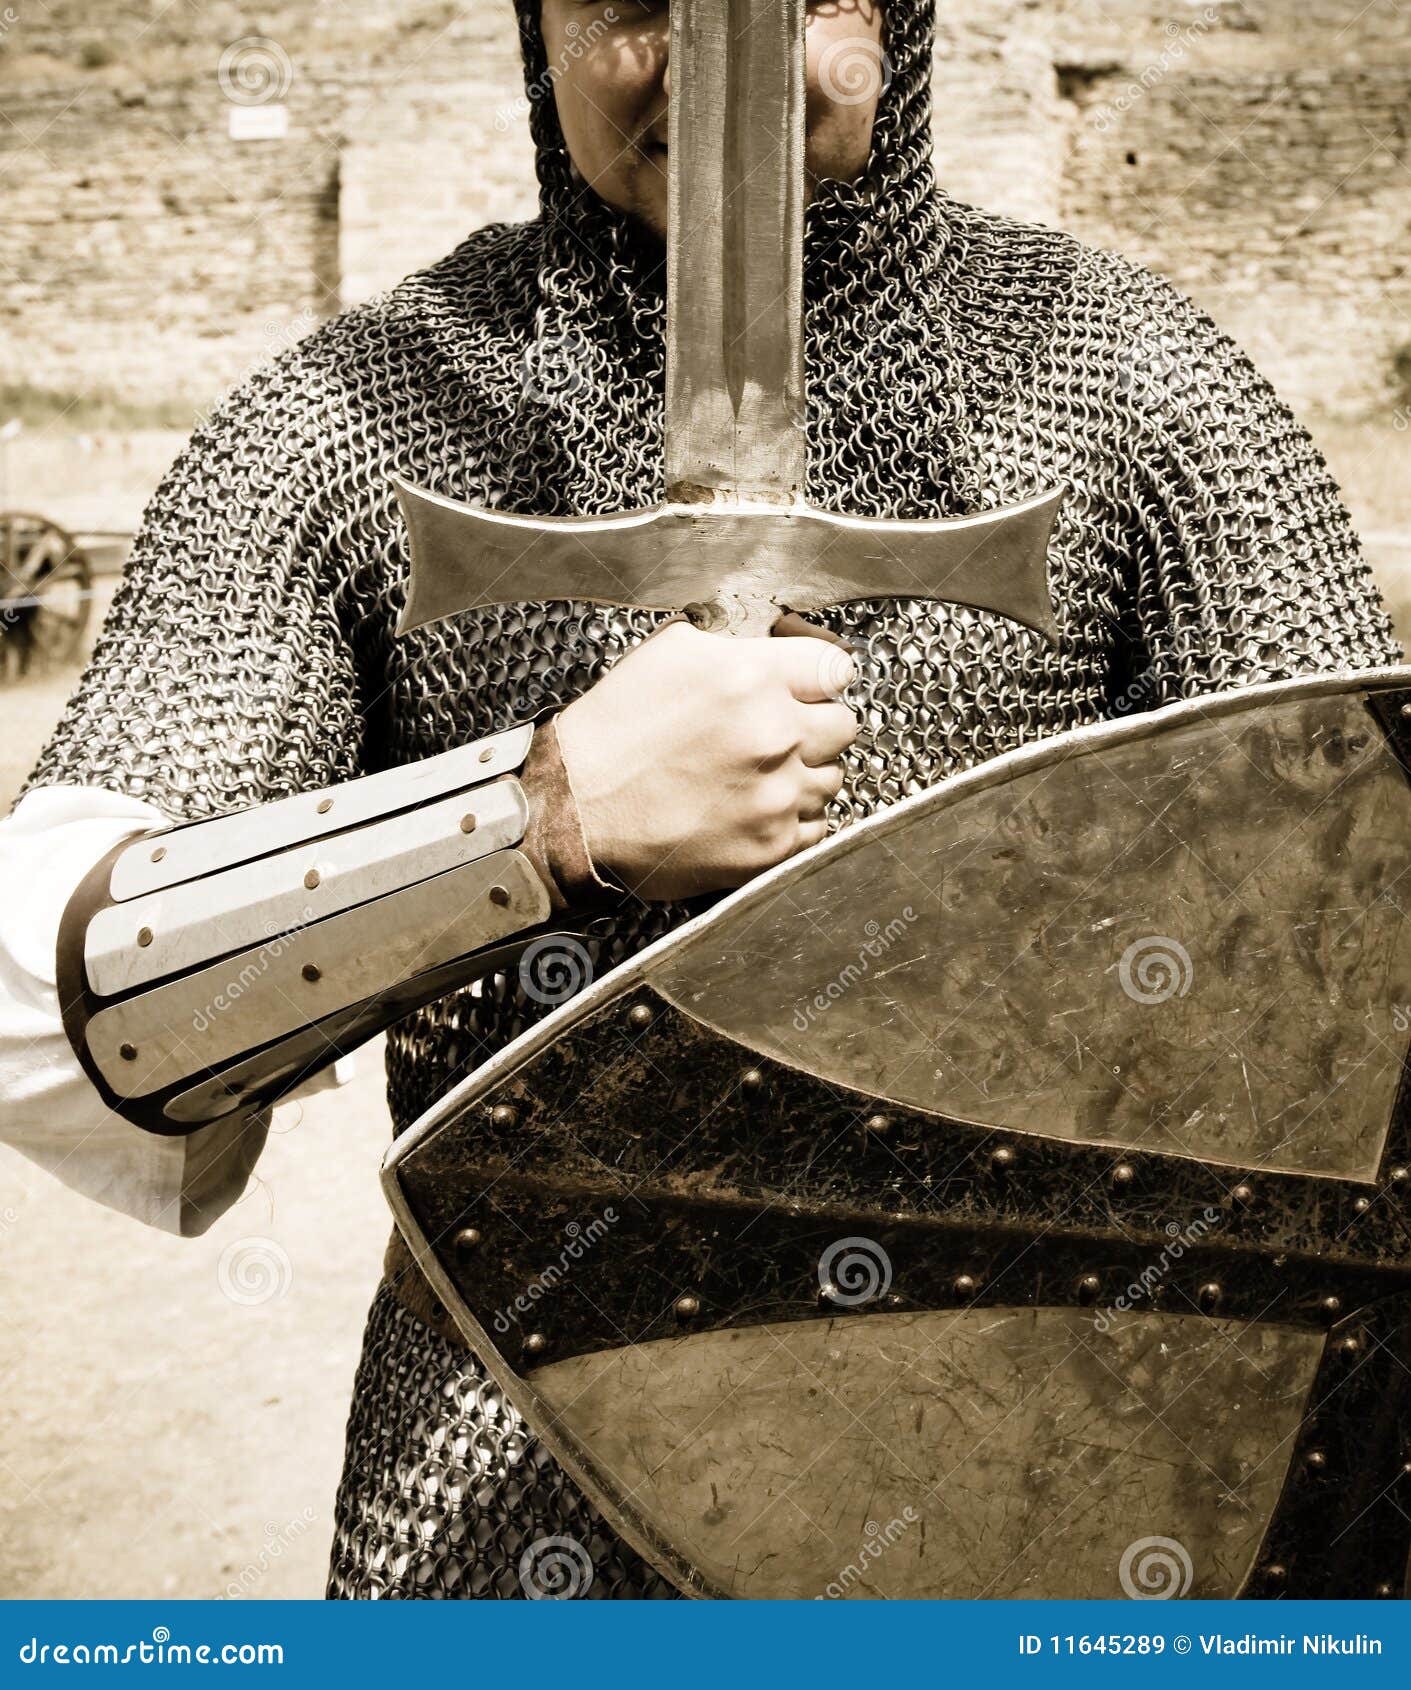 Knight with fight sword stock image. Image of military - 11645289